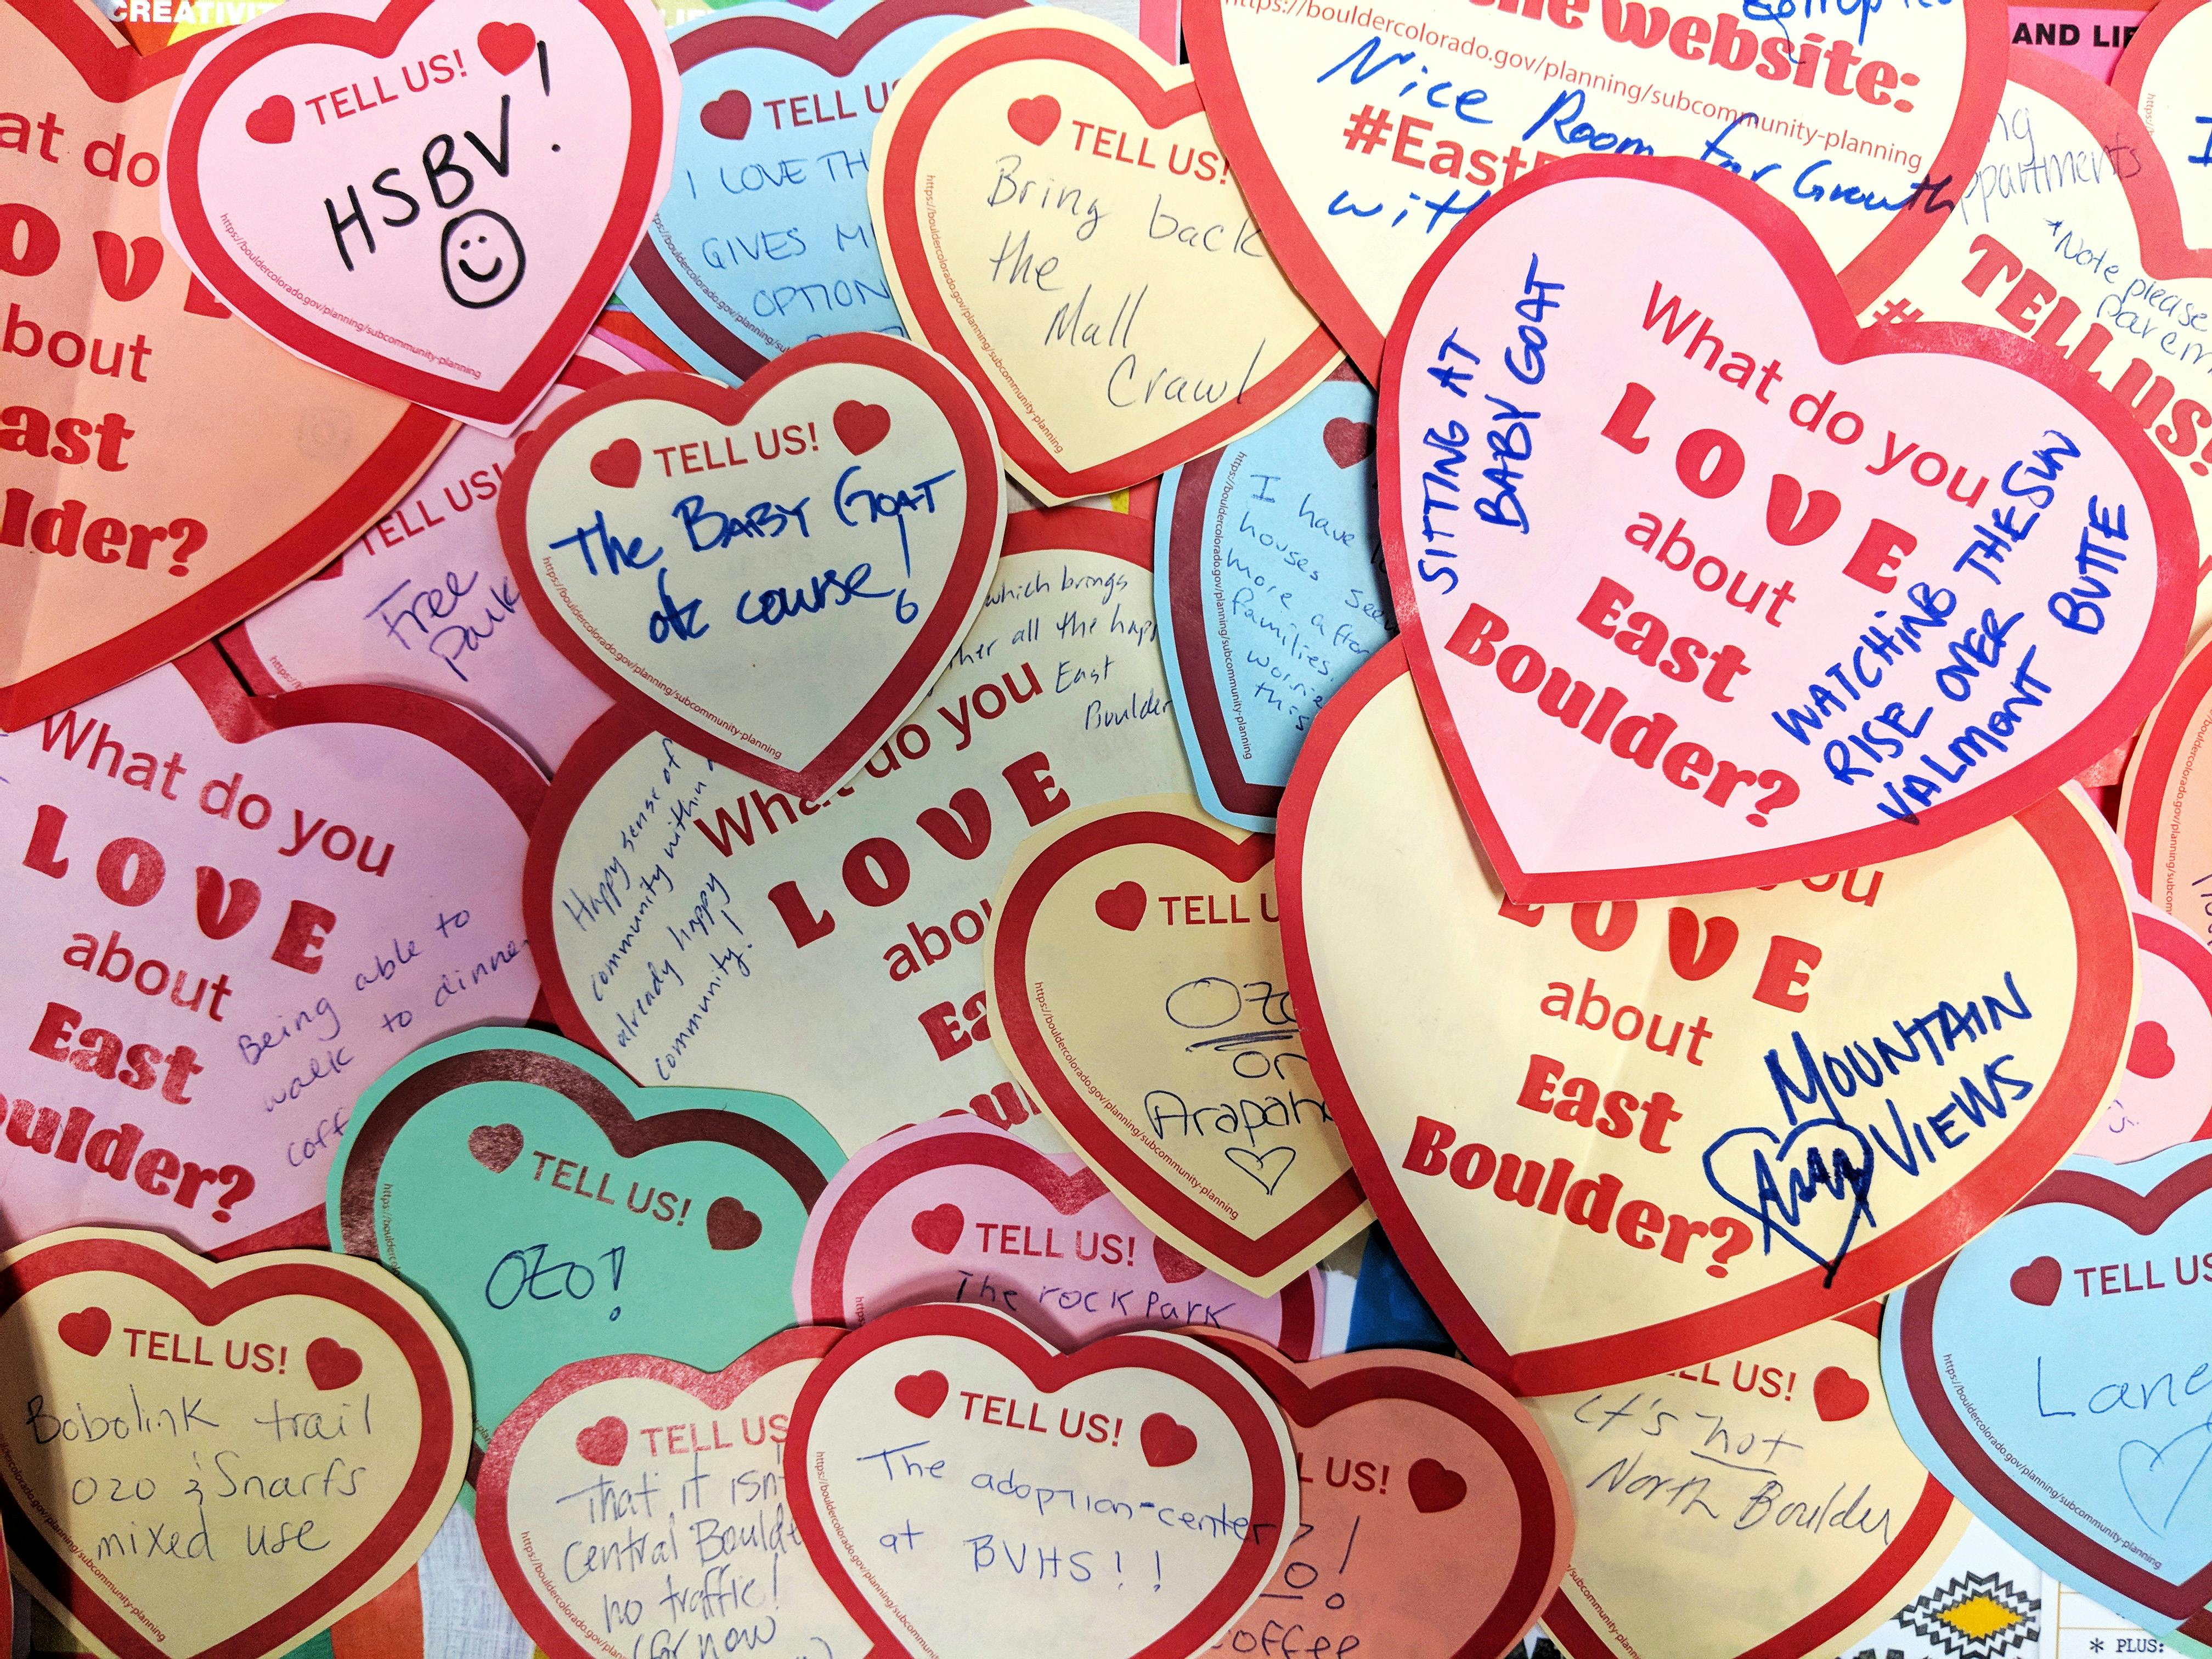 What do you LOVE about East Boulder?